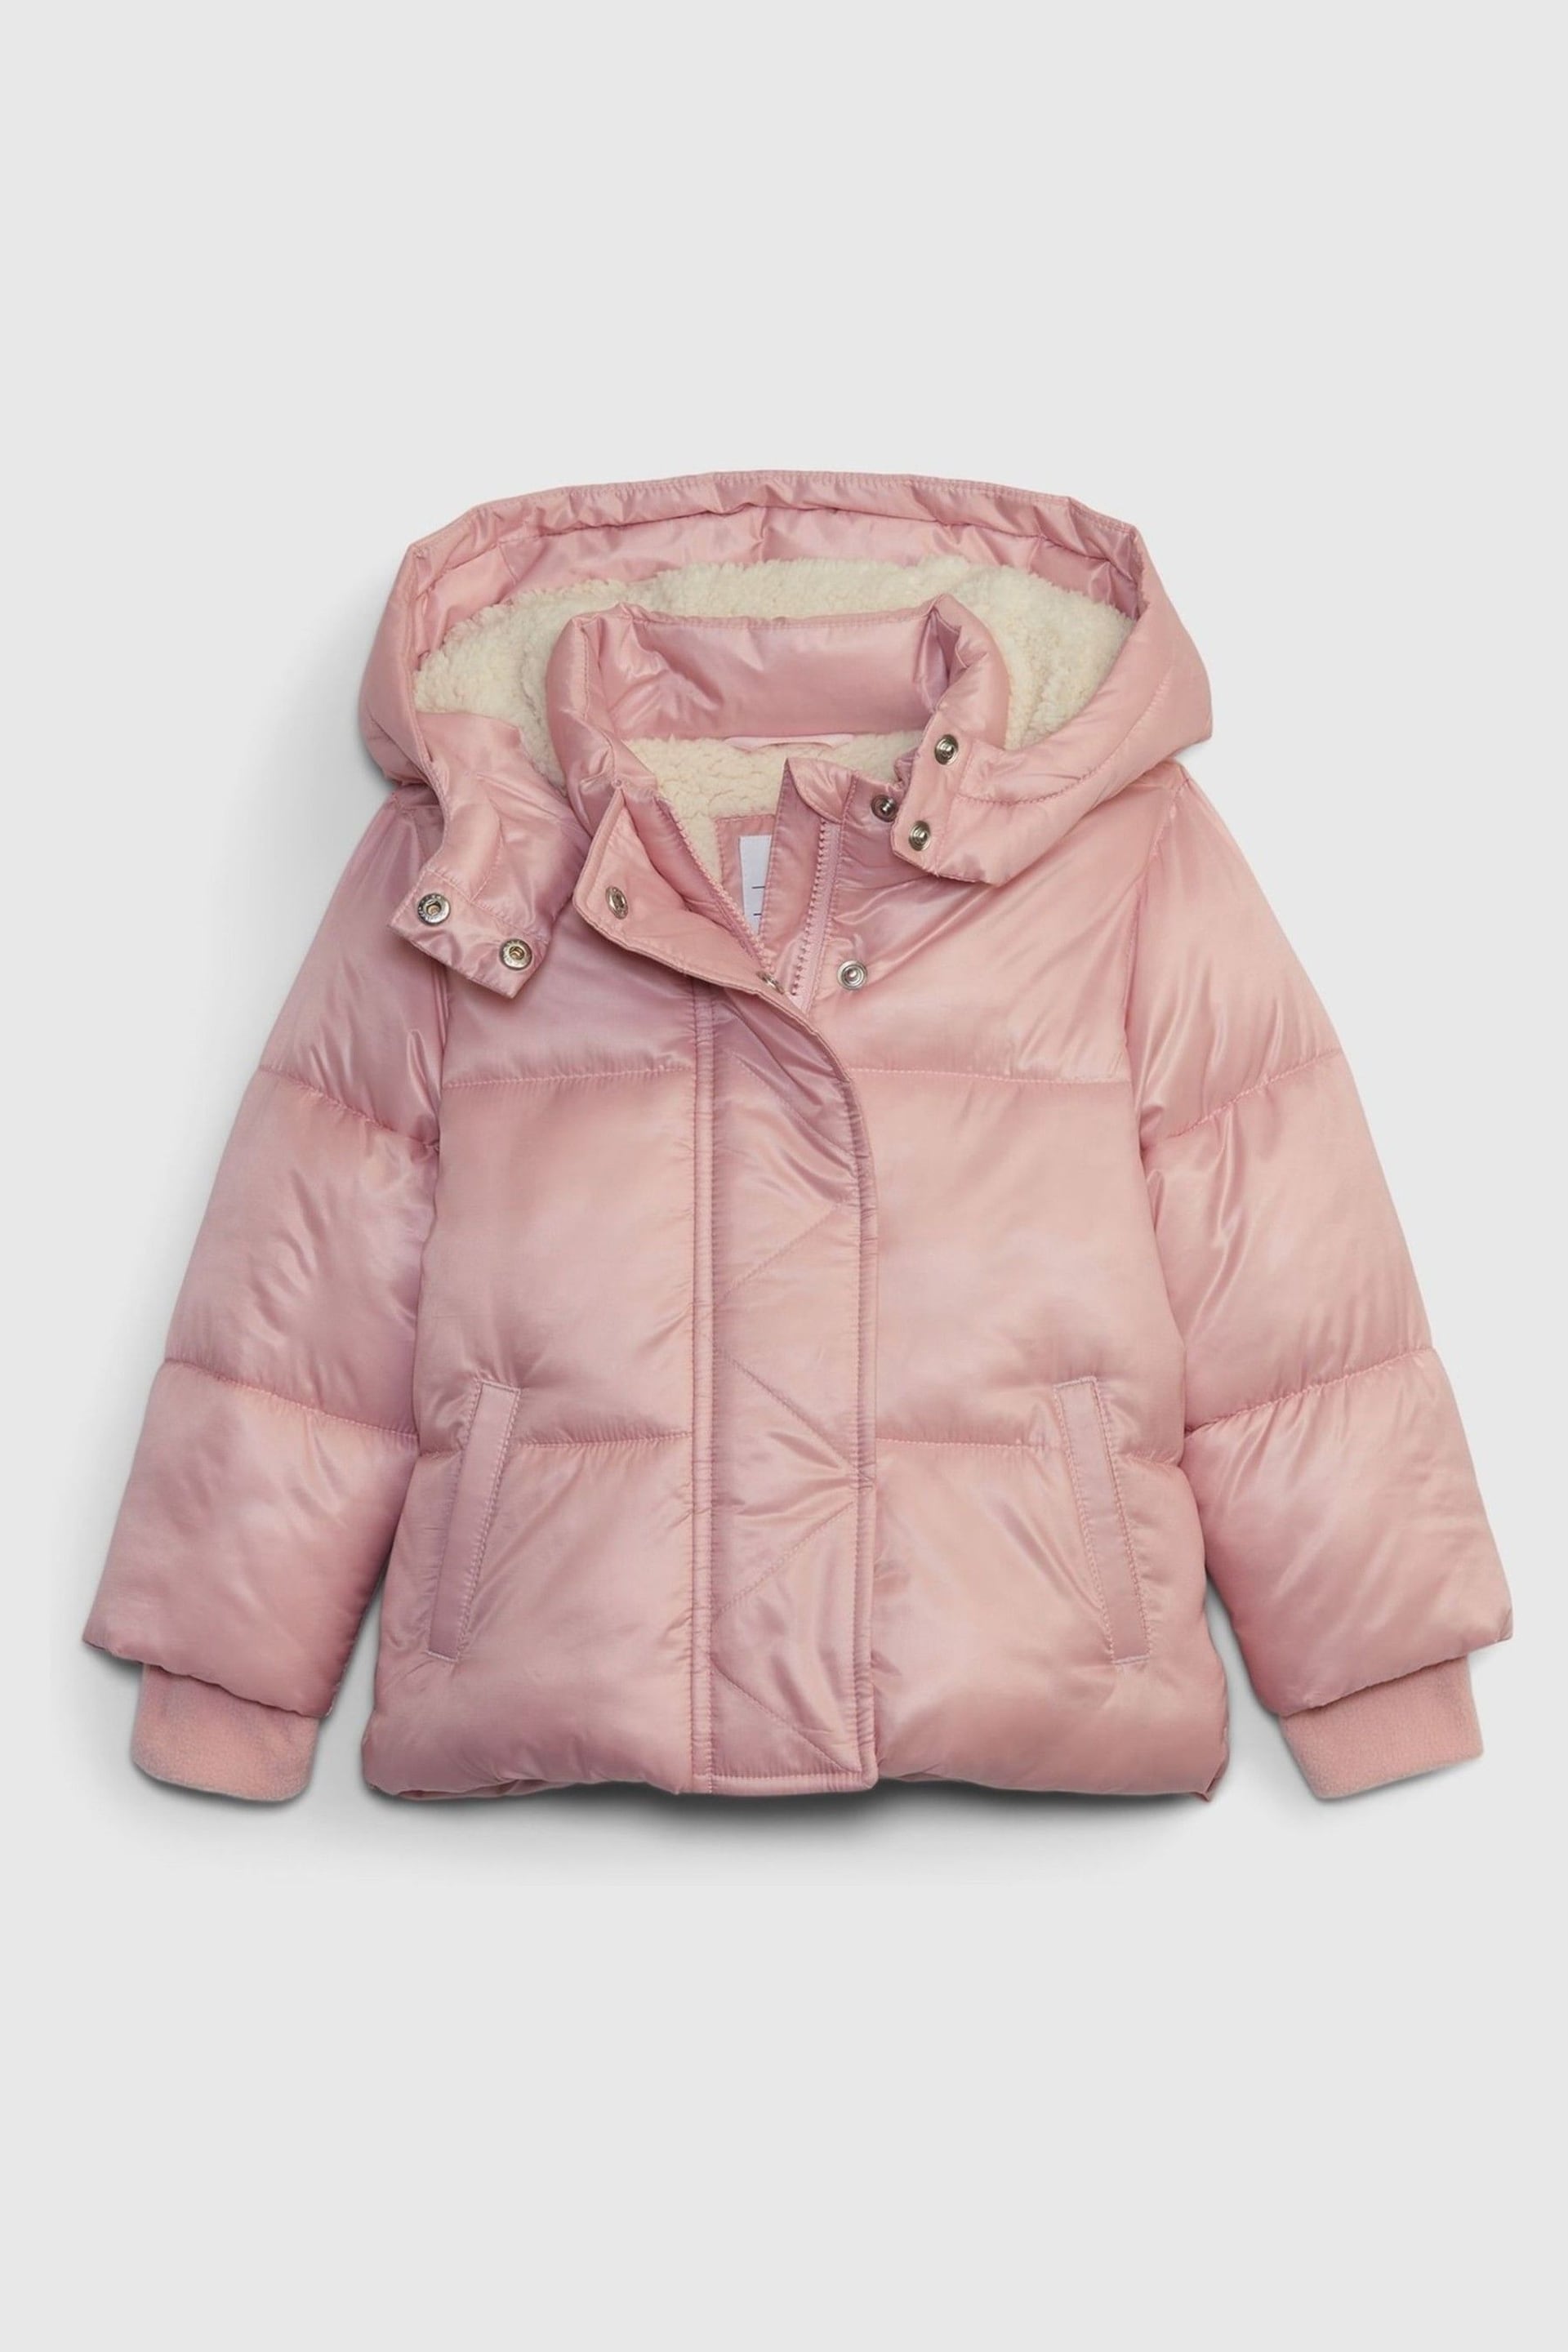 Gap Pink Water Resistant Sherpa Lined Recycled Puffer Jacket (12mths-5yrs) - Image 4 of 6